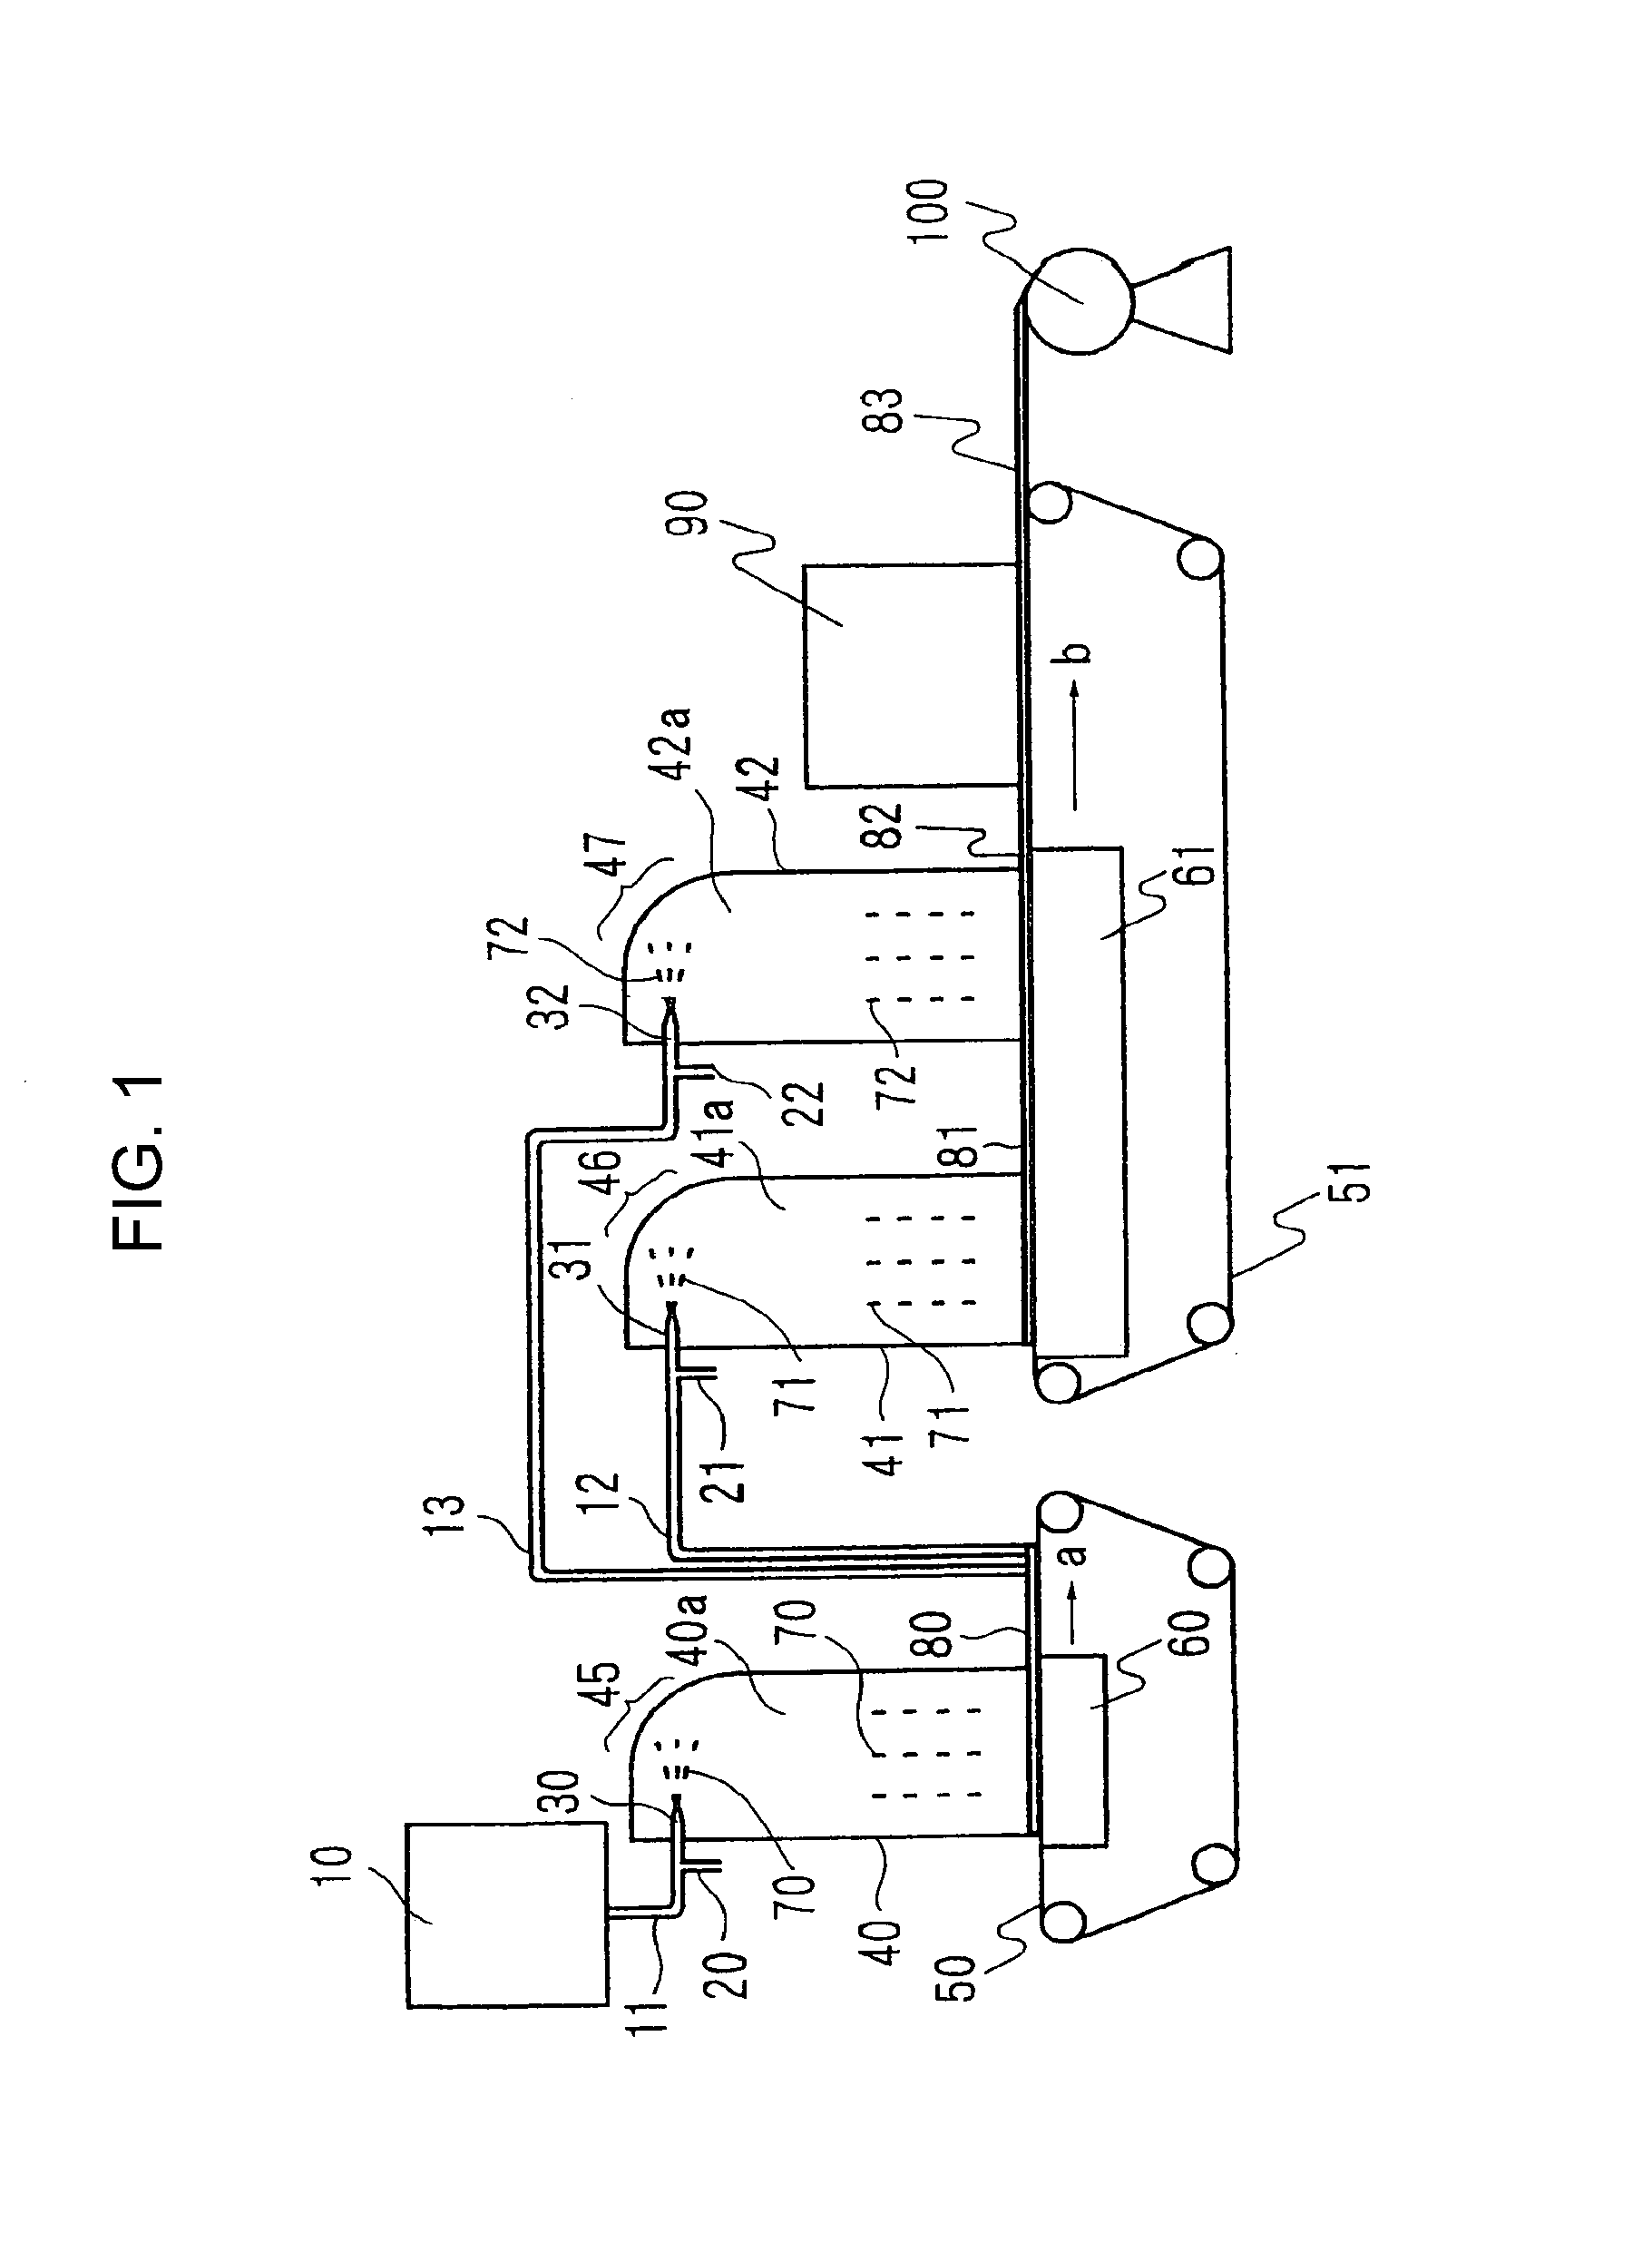 Fine-fibers-dispersed nonwoven fabric, process and apparatus for manufacturing same, and sheet material containing same